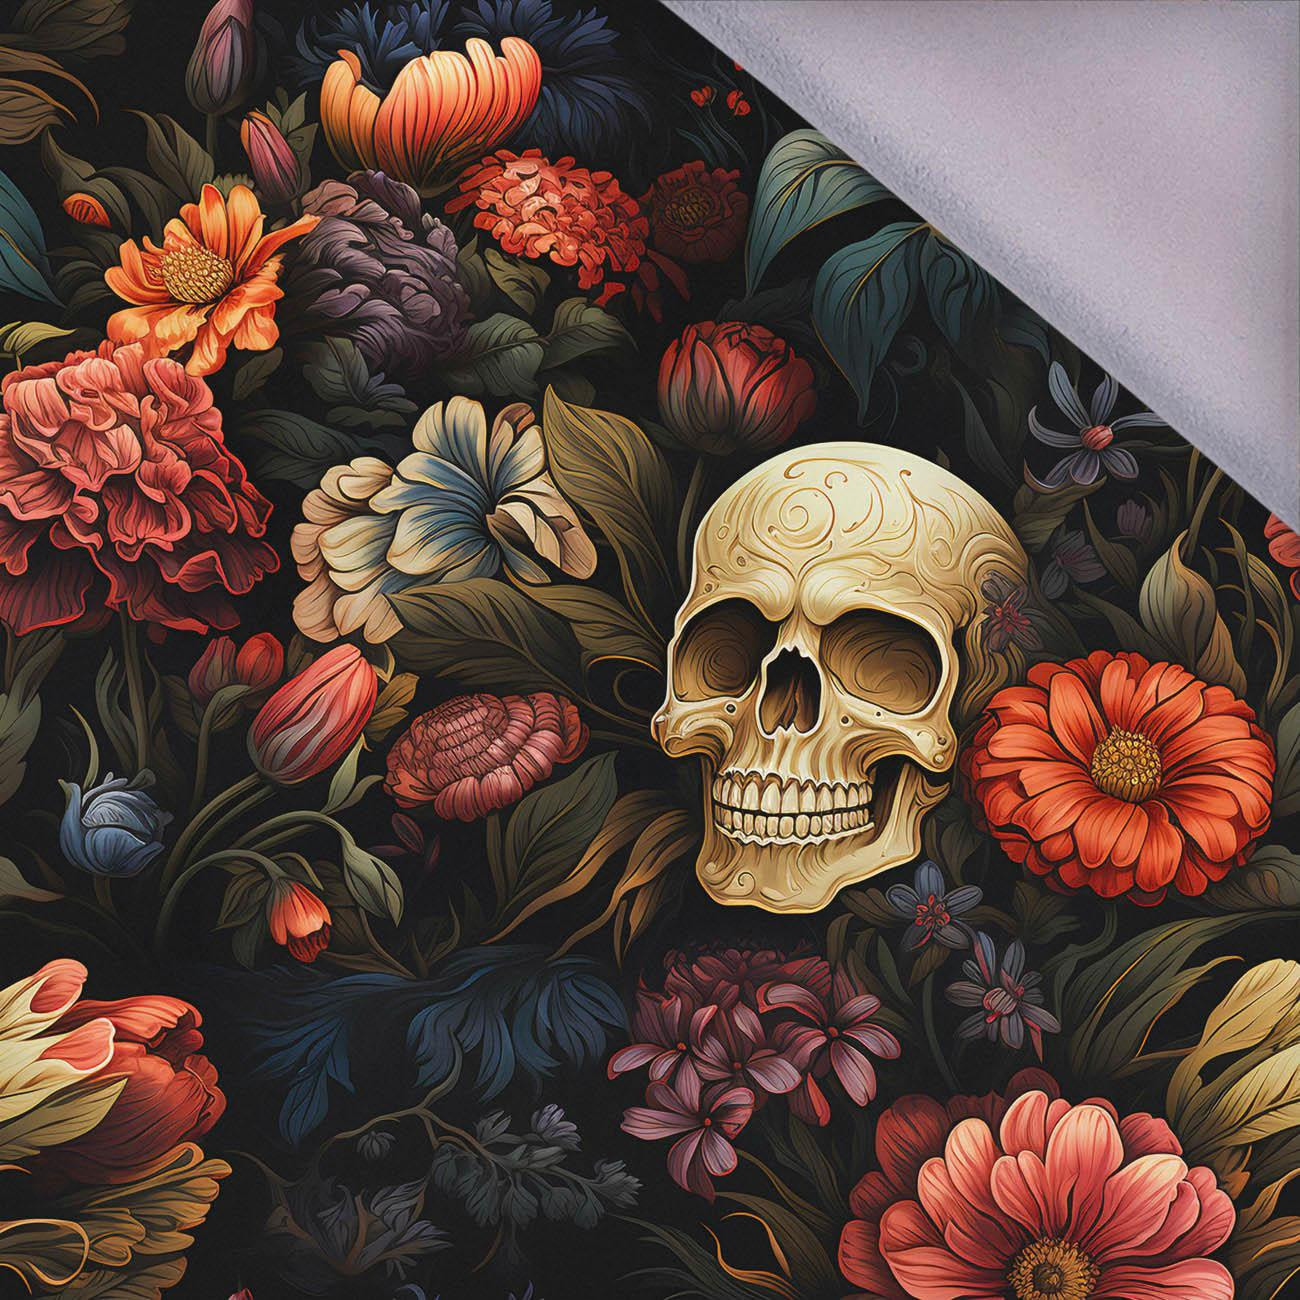 FLOWERS AND SKULL - softshell